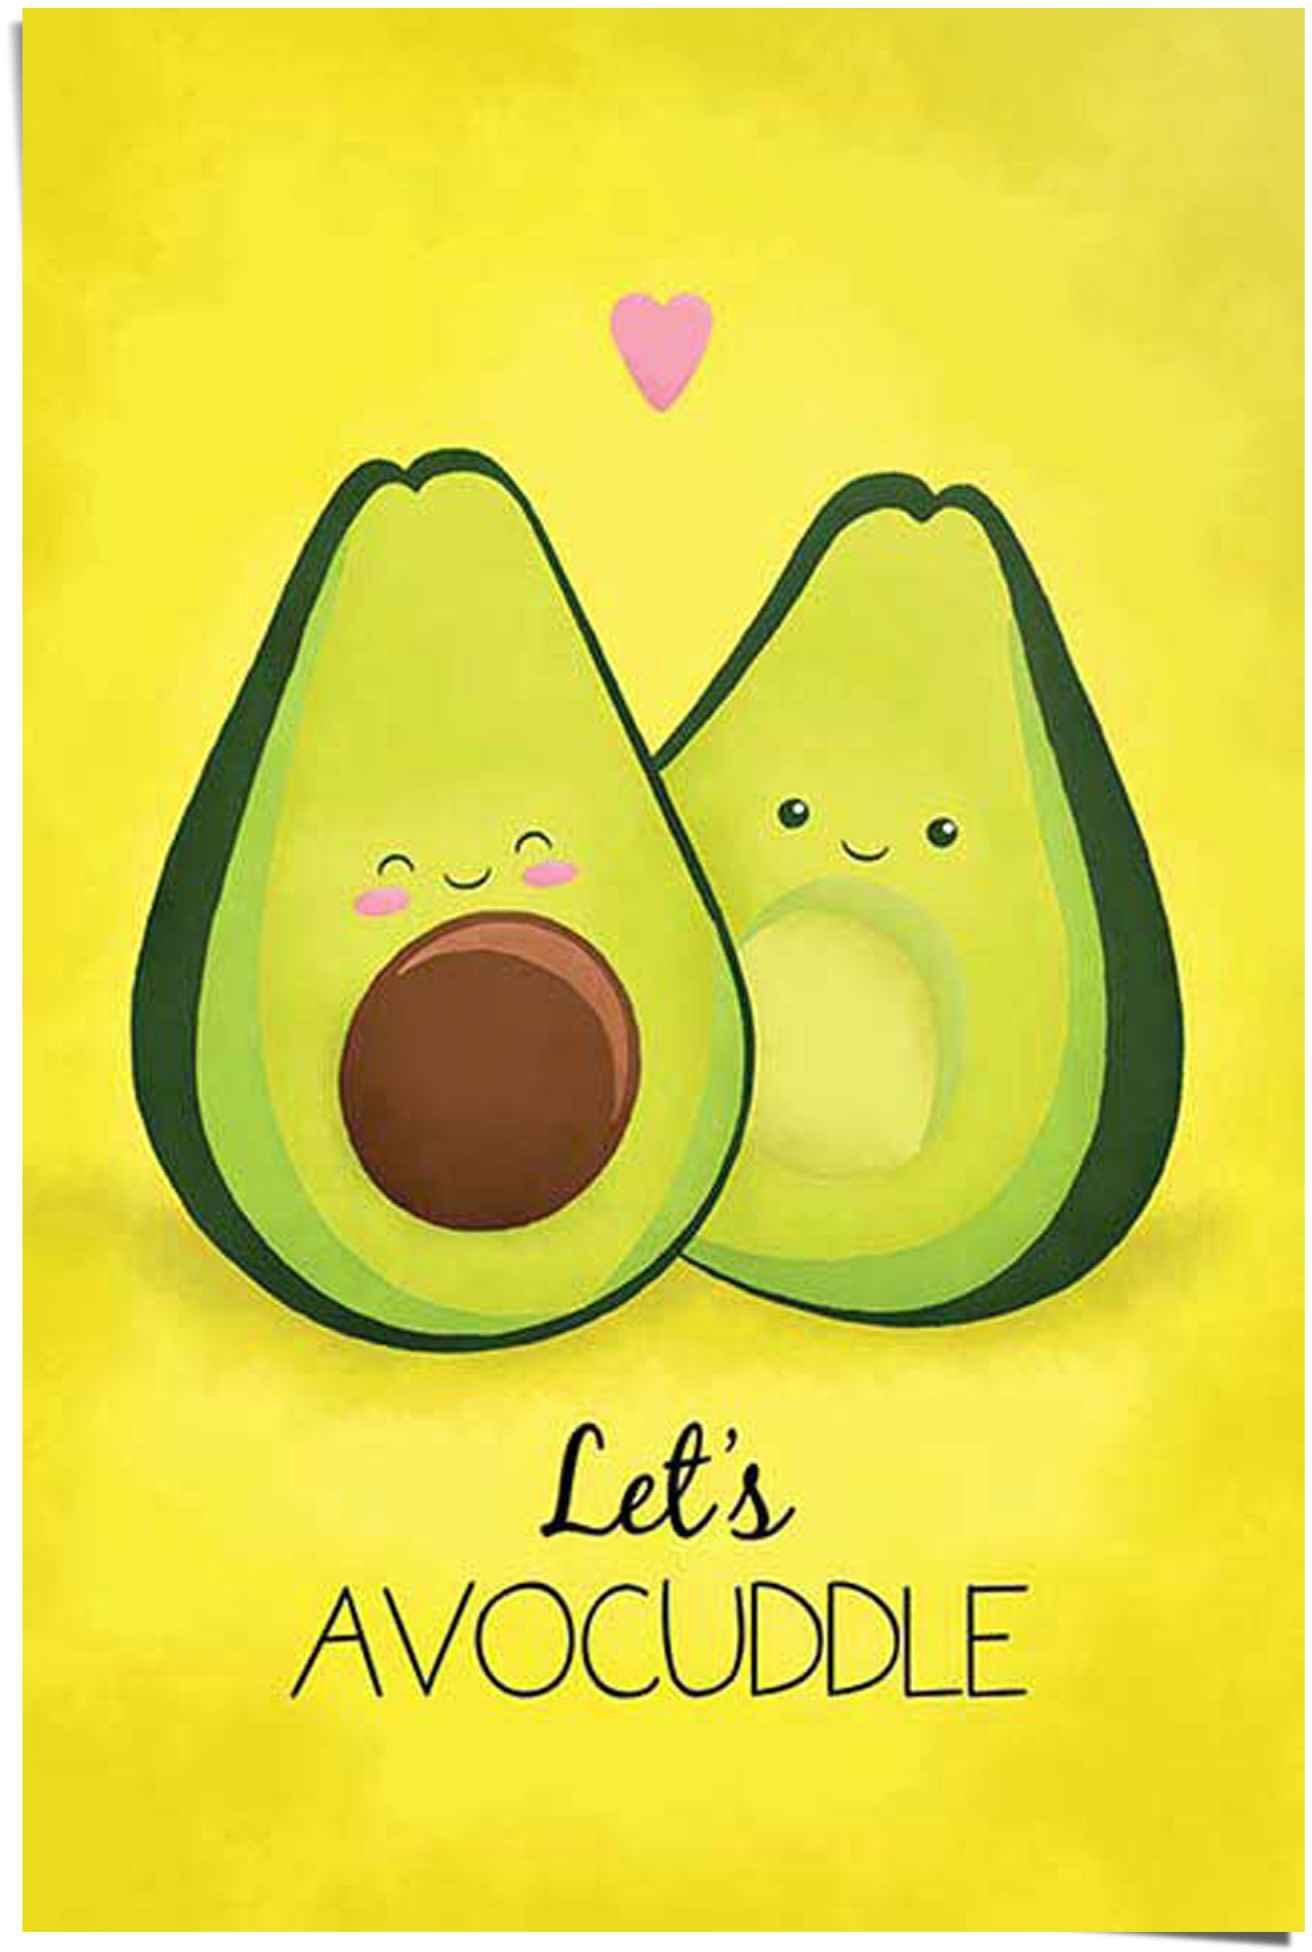 Poster (1 St) Reinders! Avocado avocuddle, let´s